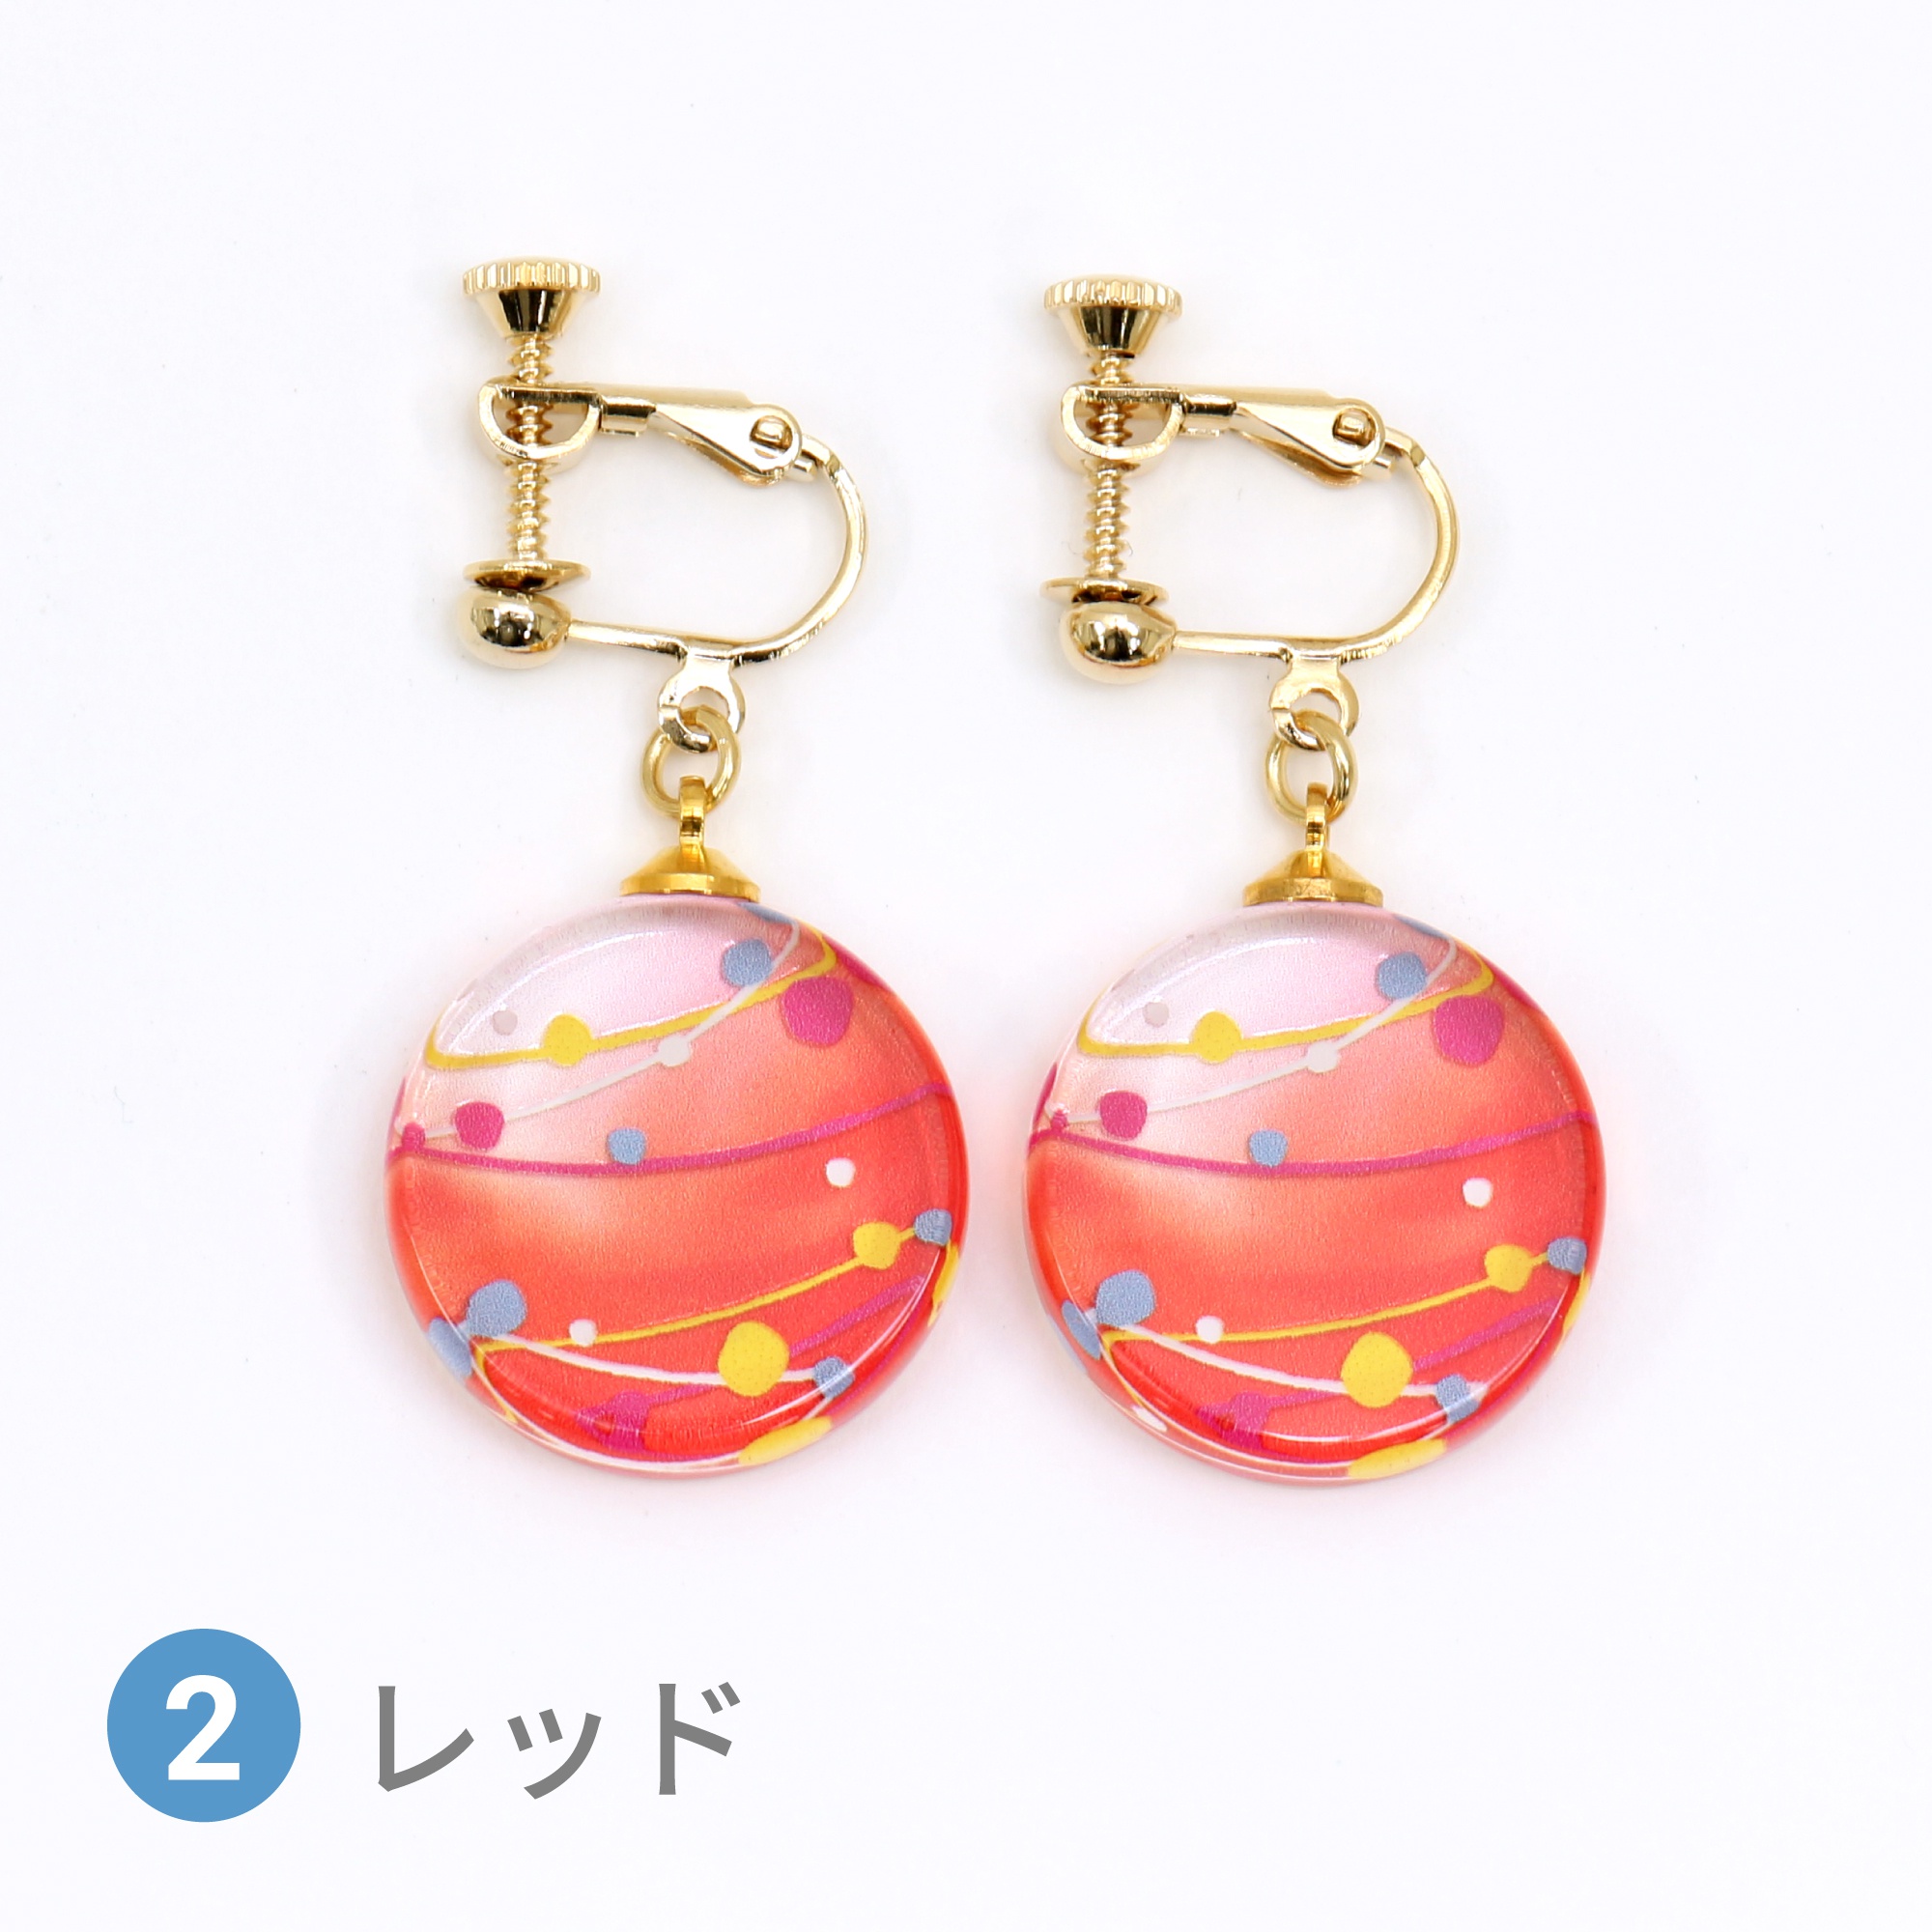 Glass accessories Earring WATER BALLOON red round shape